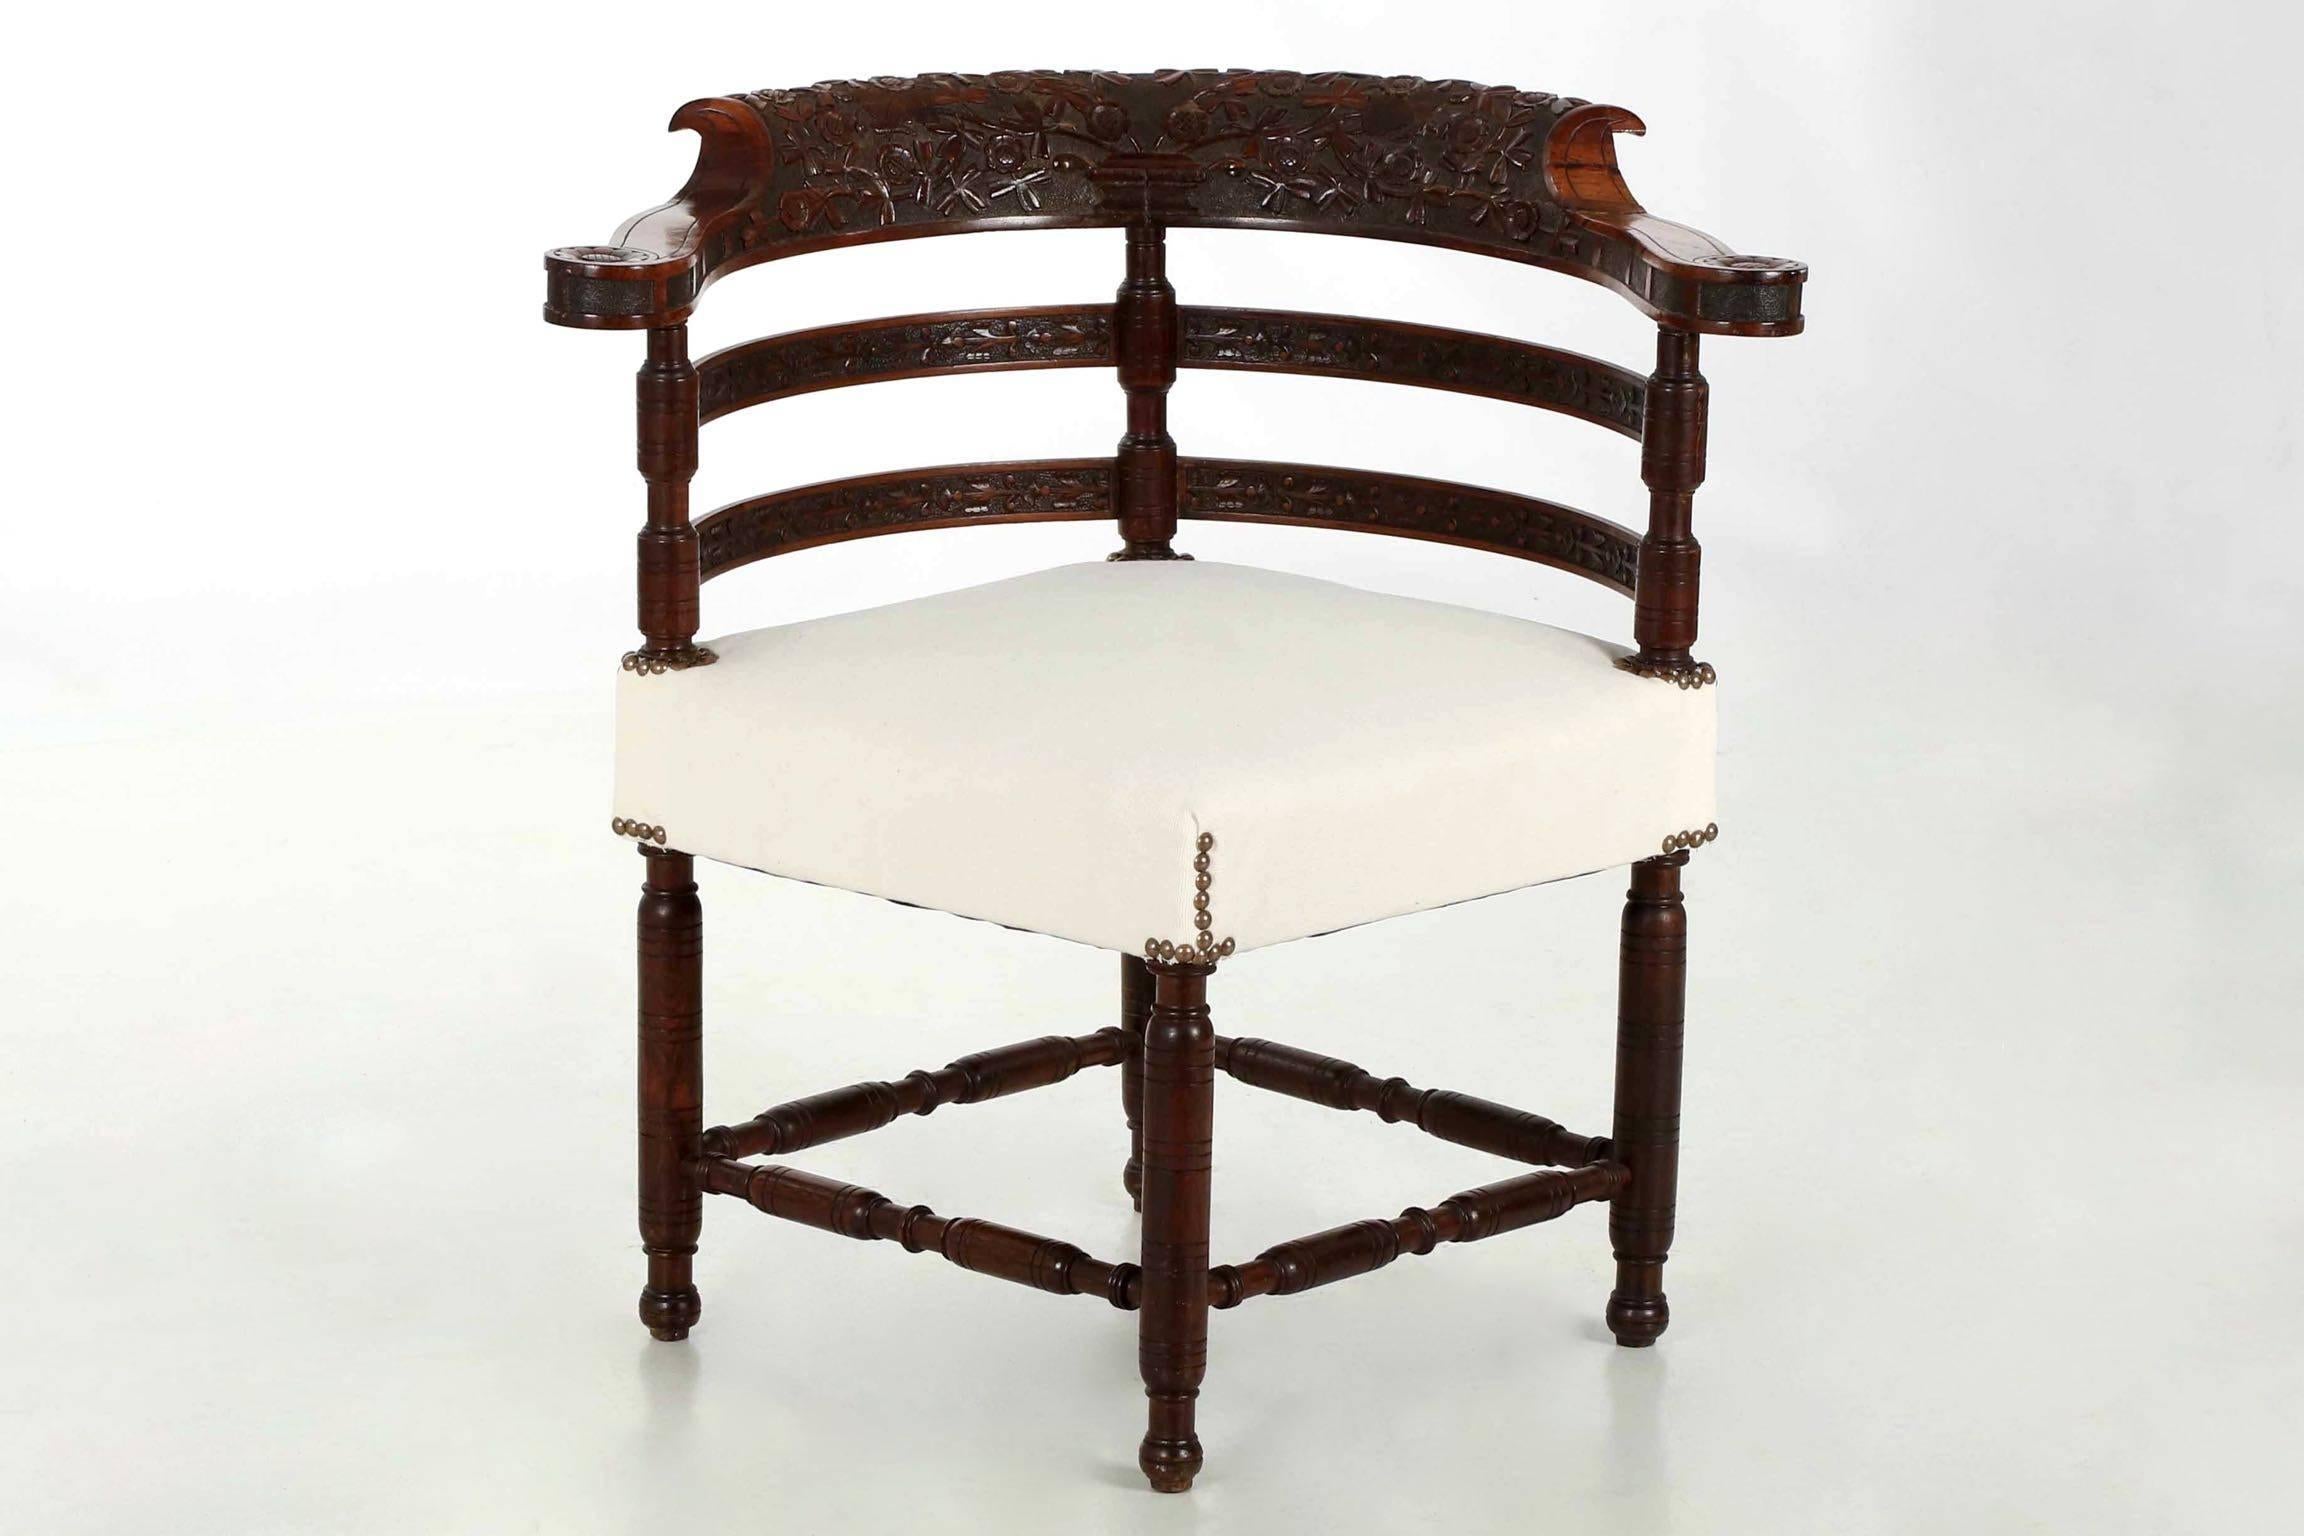 This chair is a very fine and rather uncommon example of the unique works of the Aesthetic Movement, where designers sought a return to individualized expression and hand craftsmanship during an age of mechanized furniture manufacture. In the same